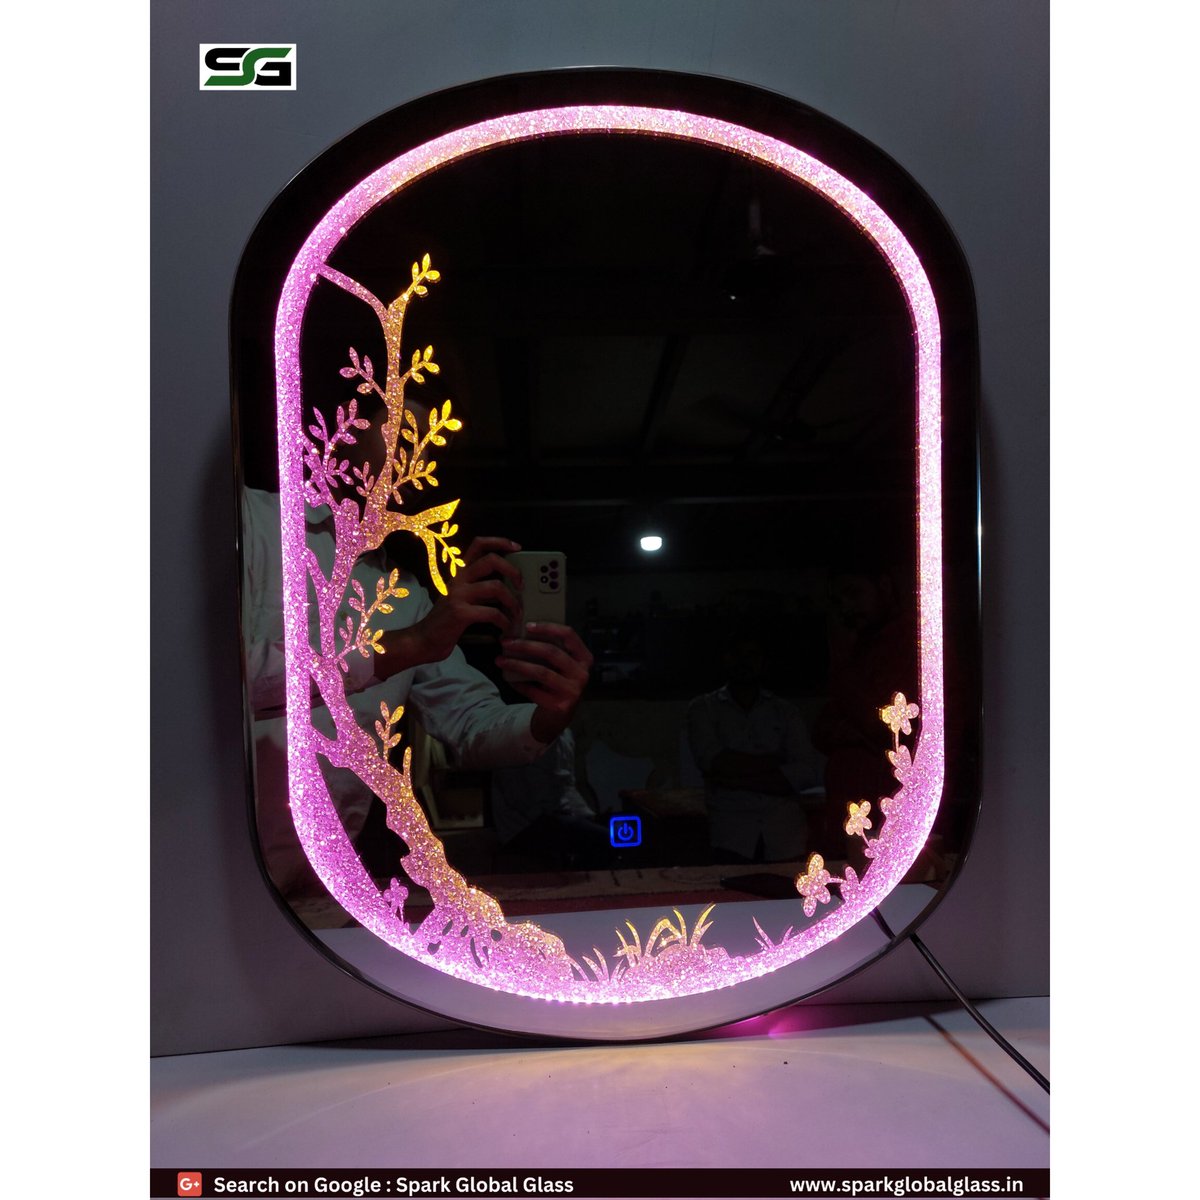 24x18 Inch Capsule💊 Shape Small (Choora) Diamond LED Touch Sensor Mirror With Dimmer (Dimmable) Option. 

Contact📞 9028421566

#SparkGlobalGlass #LedMirror #BathroomMirror